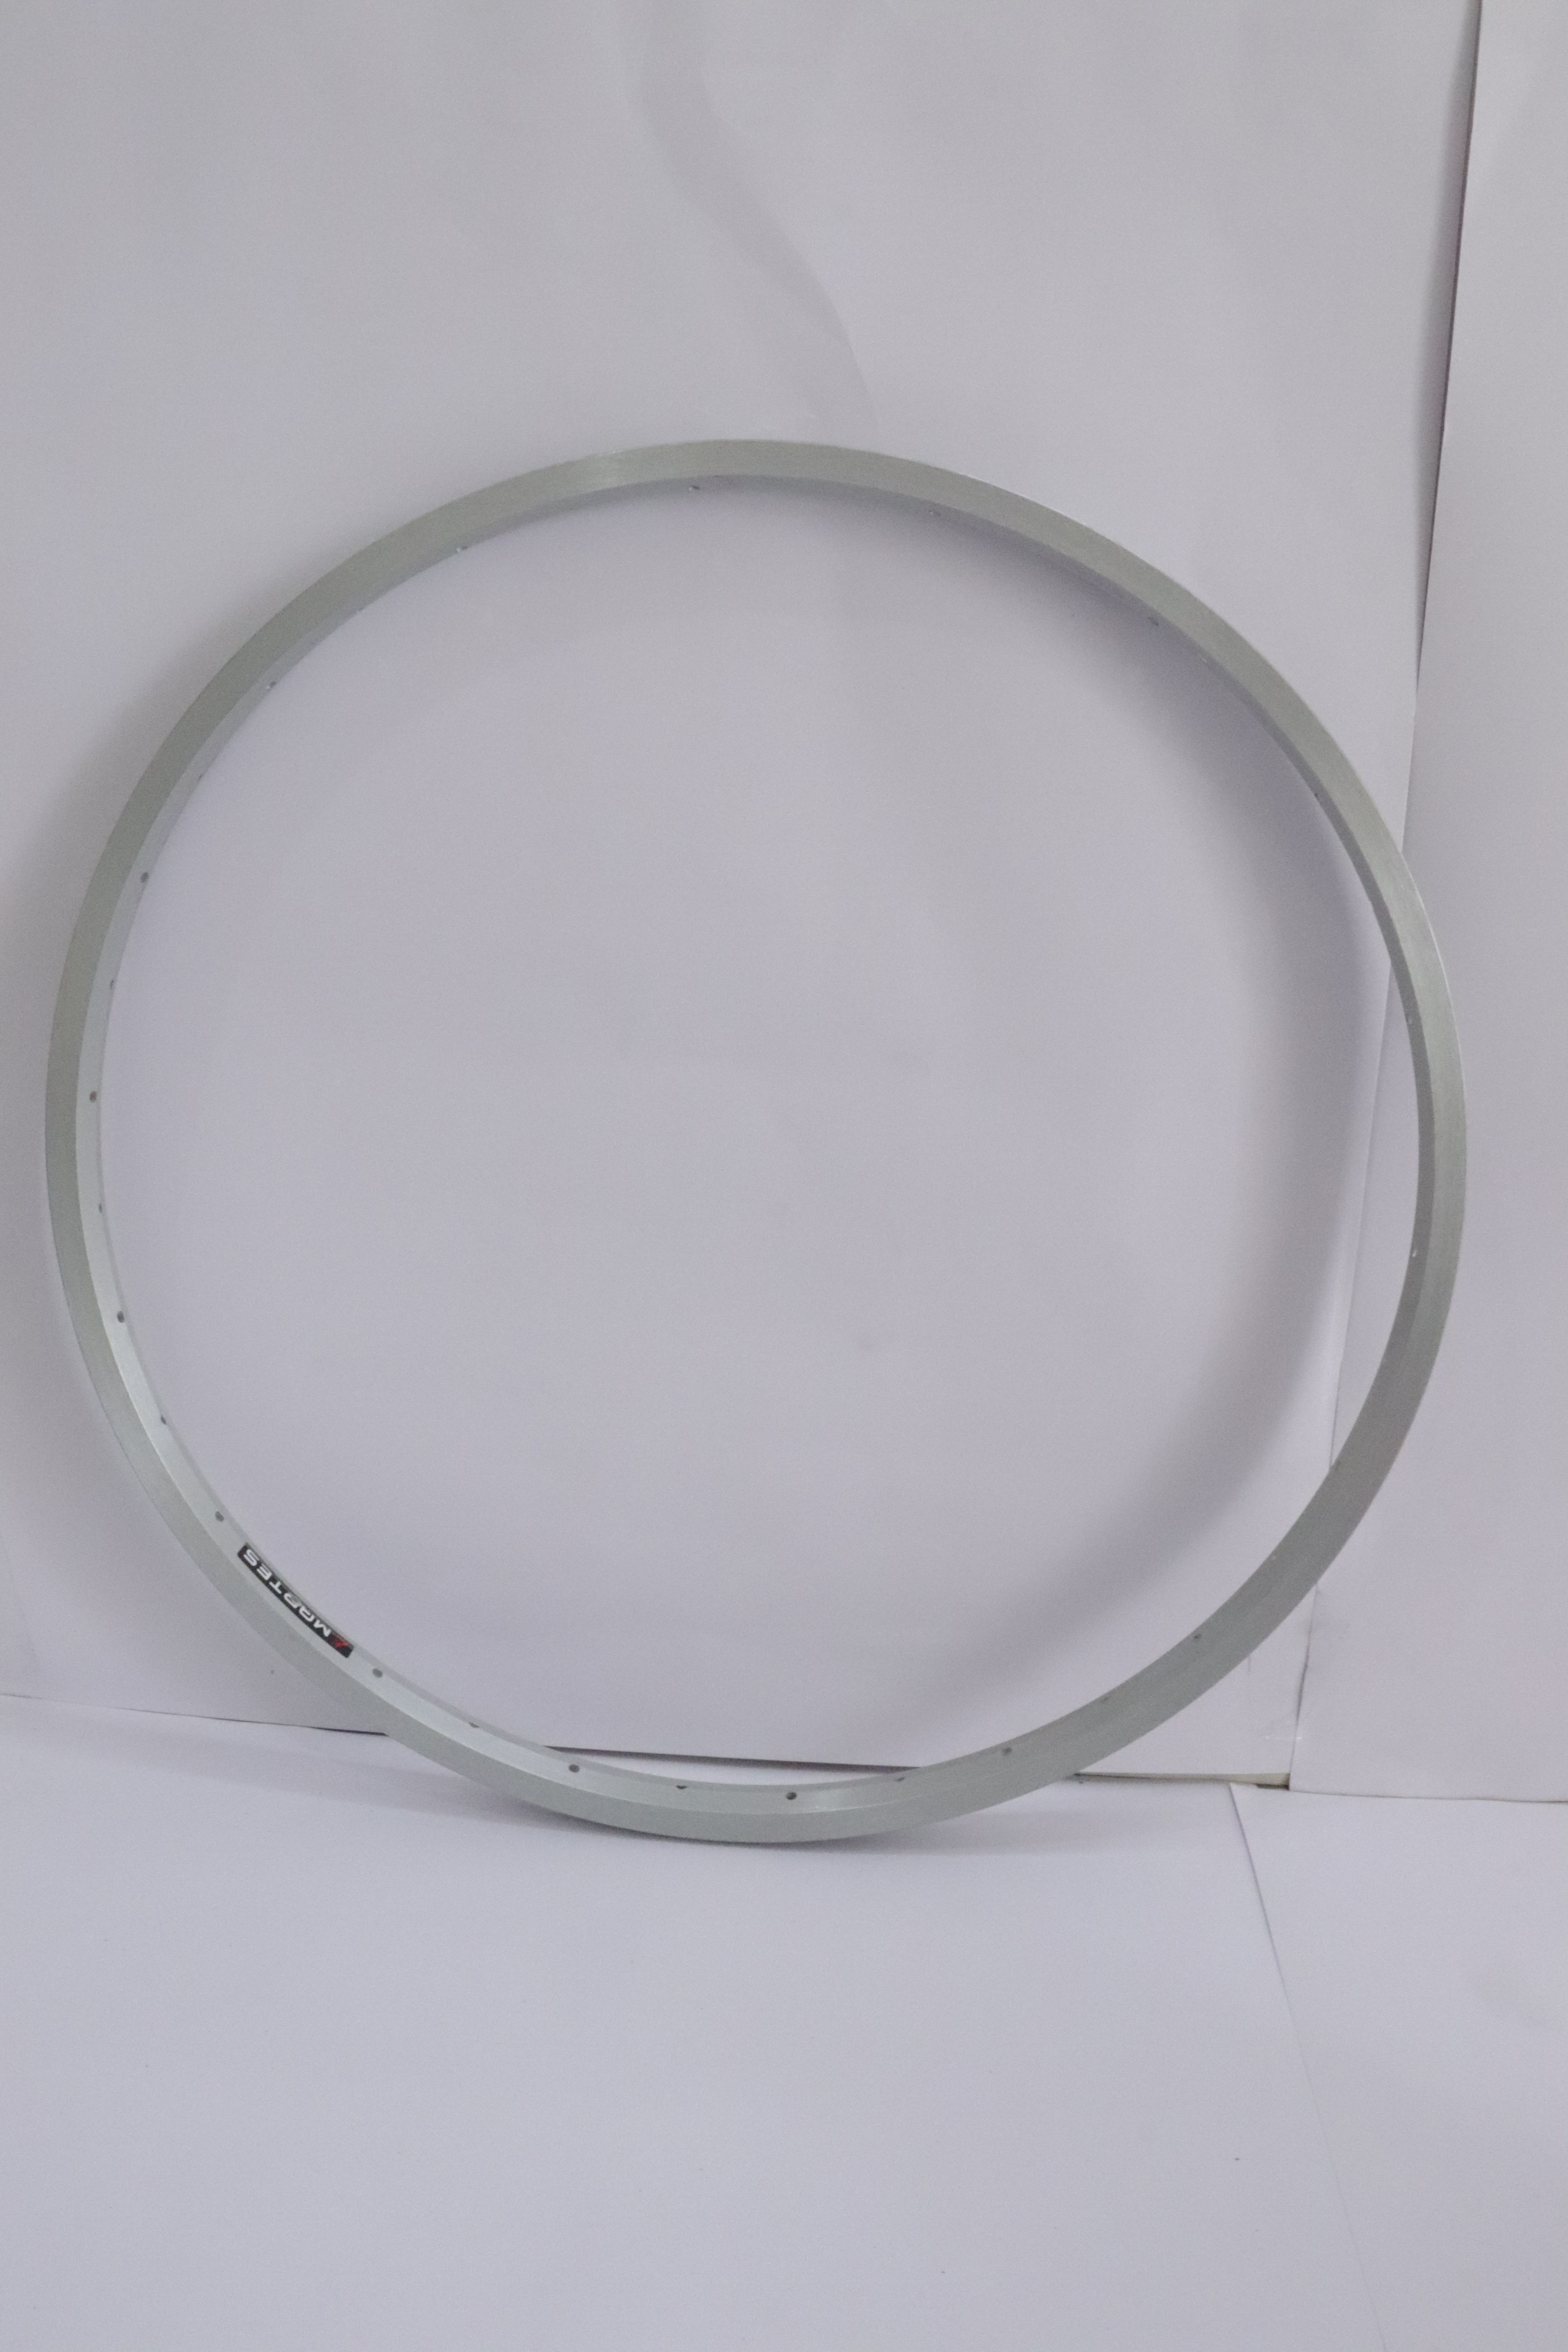 BICYCLE ALLOY RIM SINGLE WALL 26 ''SLIVER